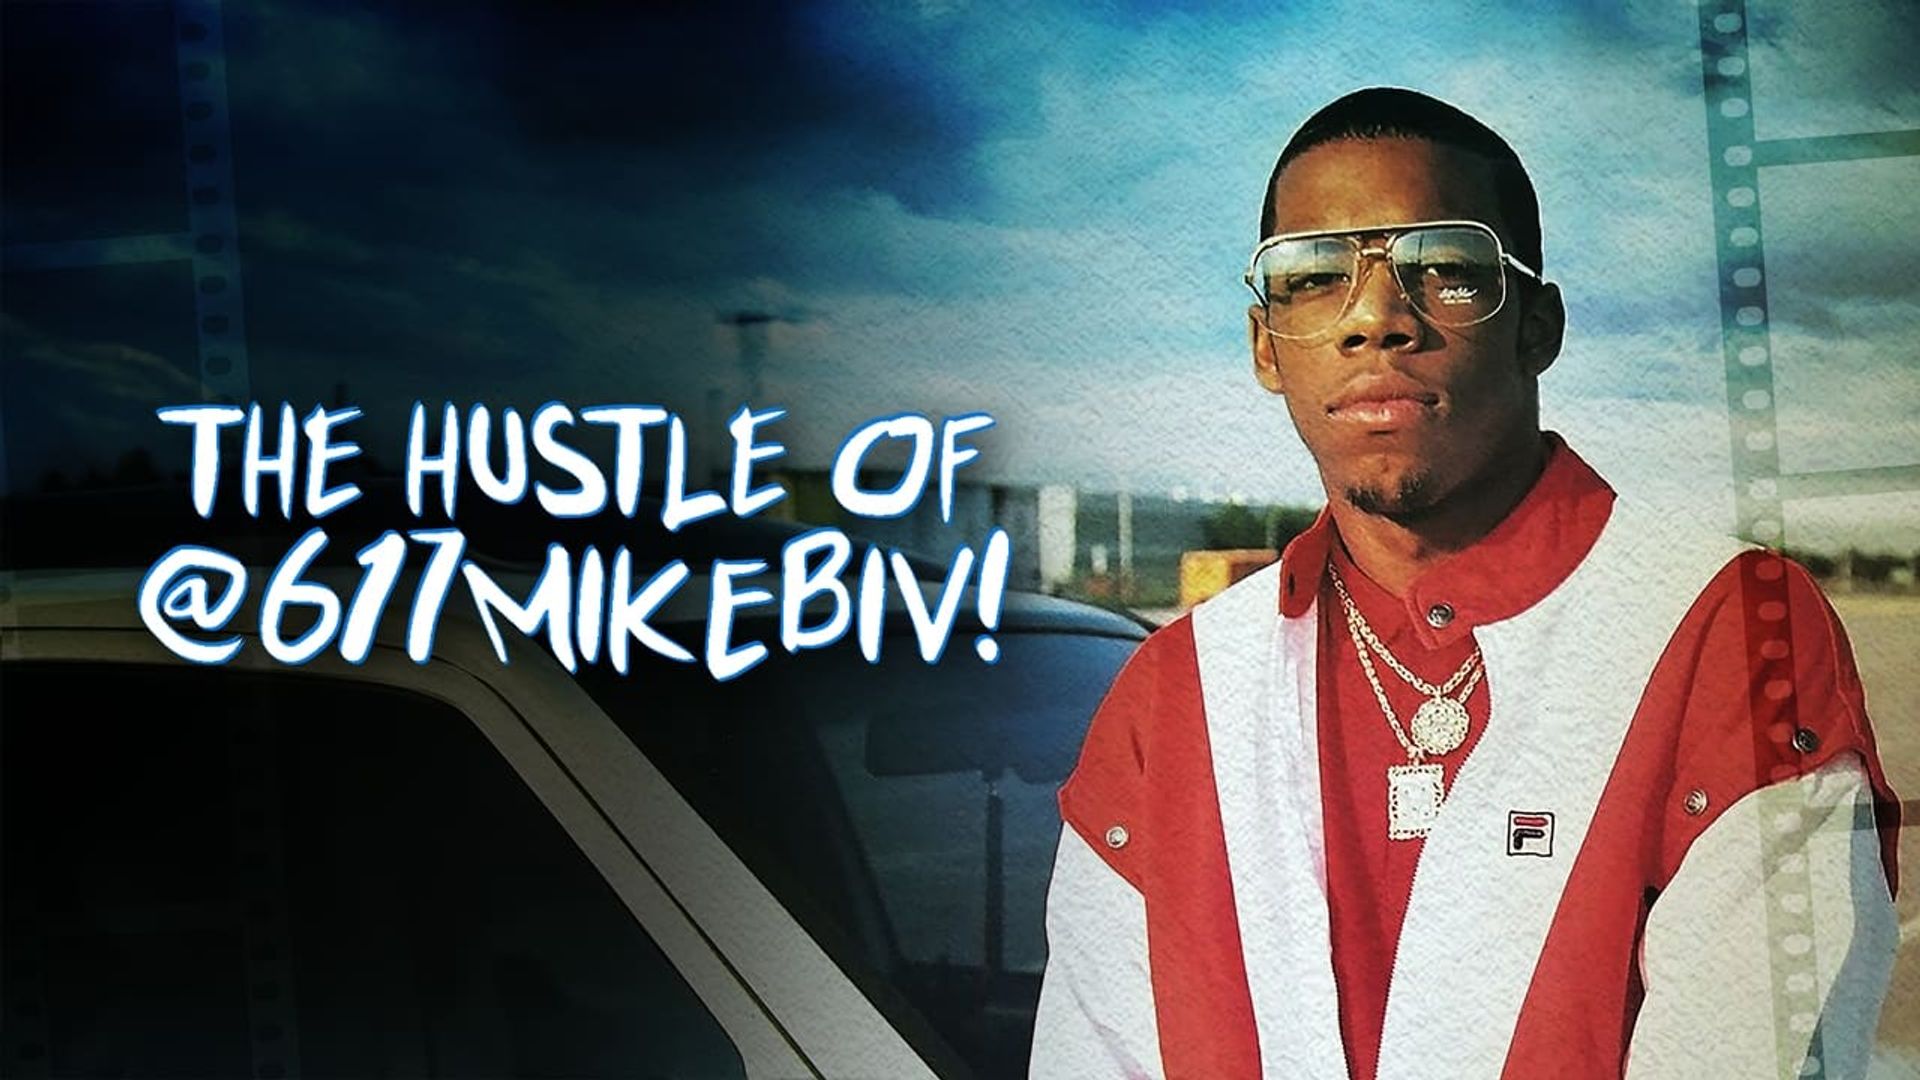 The Hustle of @617MikeBiv background